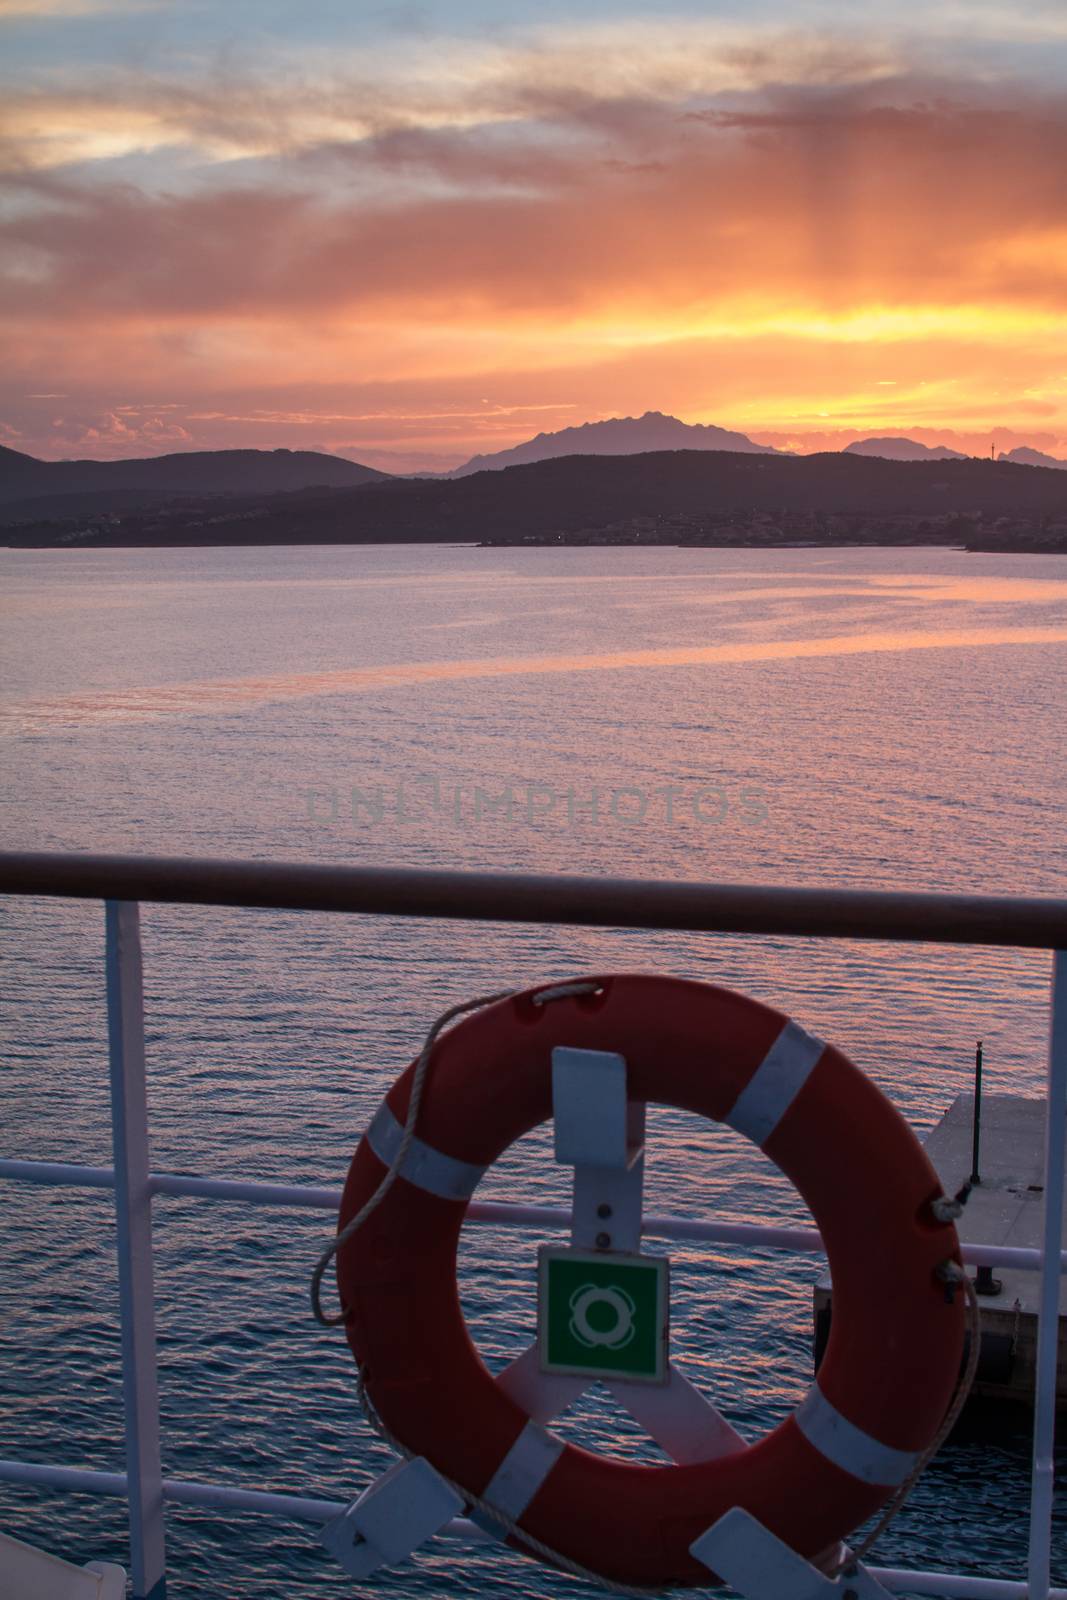 Sunrise on the Sardinian sea coast with intense orange color seen from the sea on the ferry that is about to dock with lifebuoy in the foreground